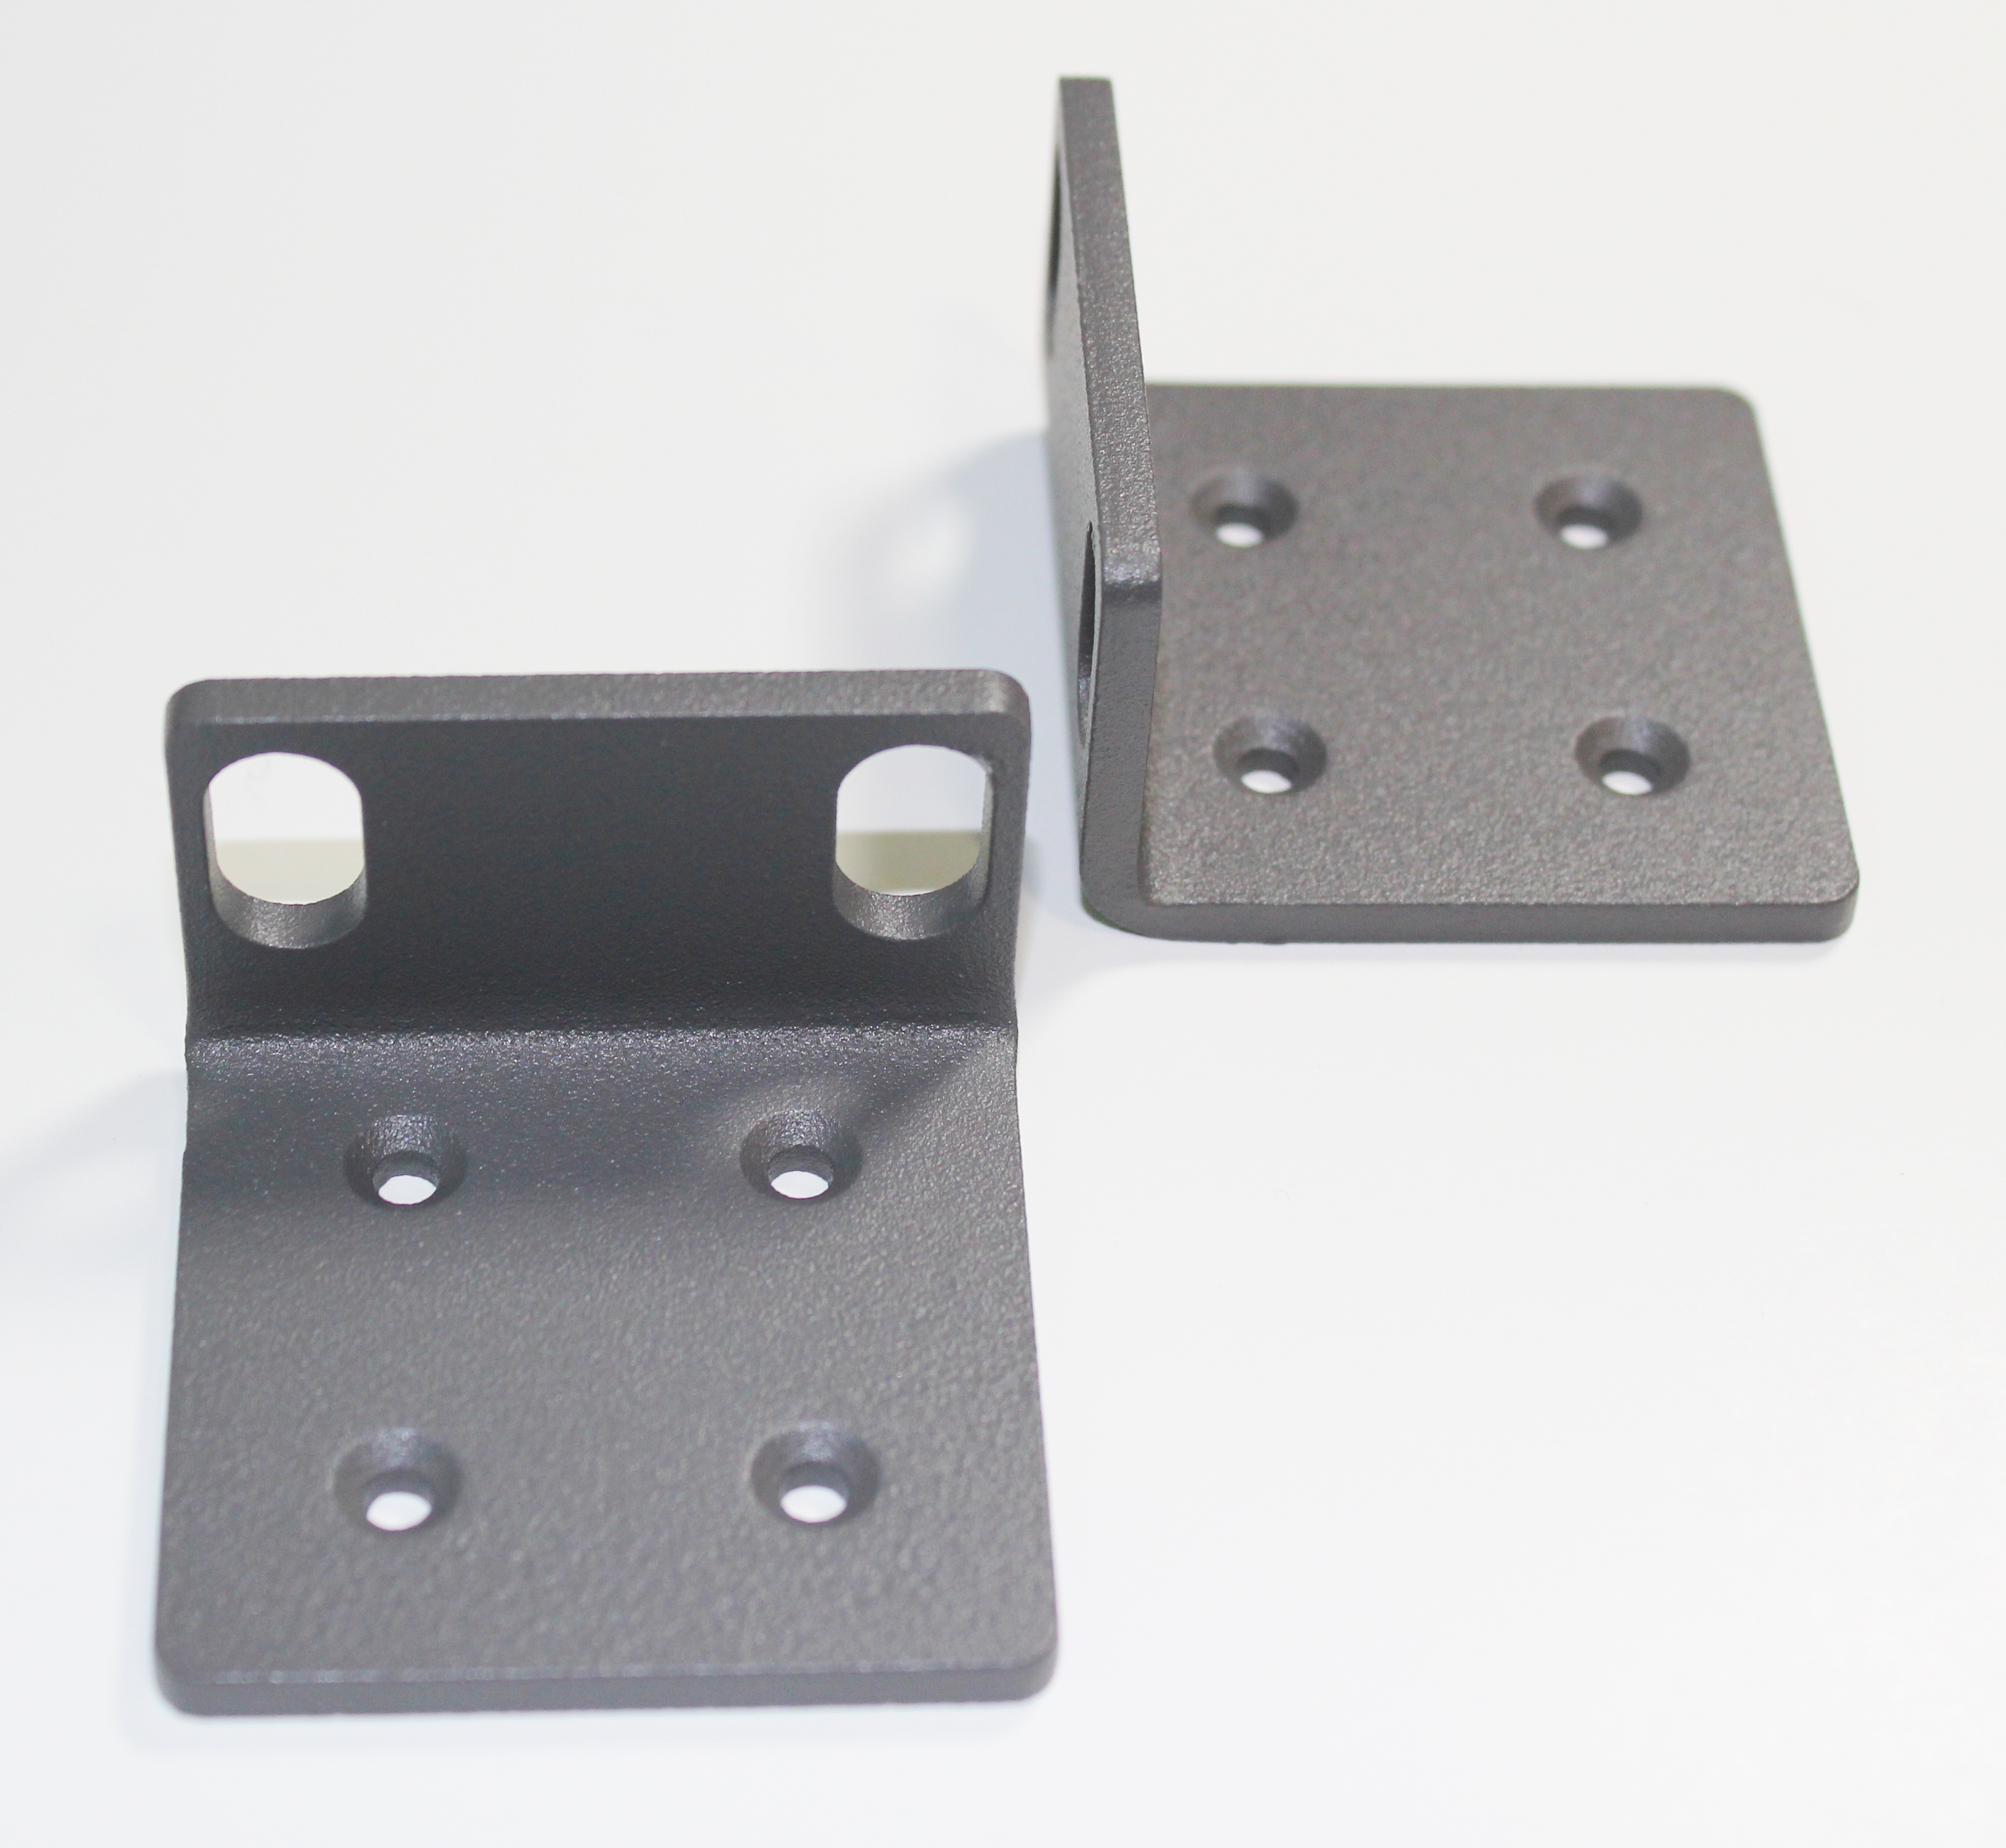 Picture of device mounting brackets.